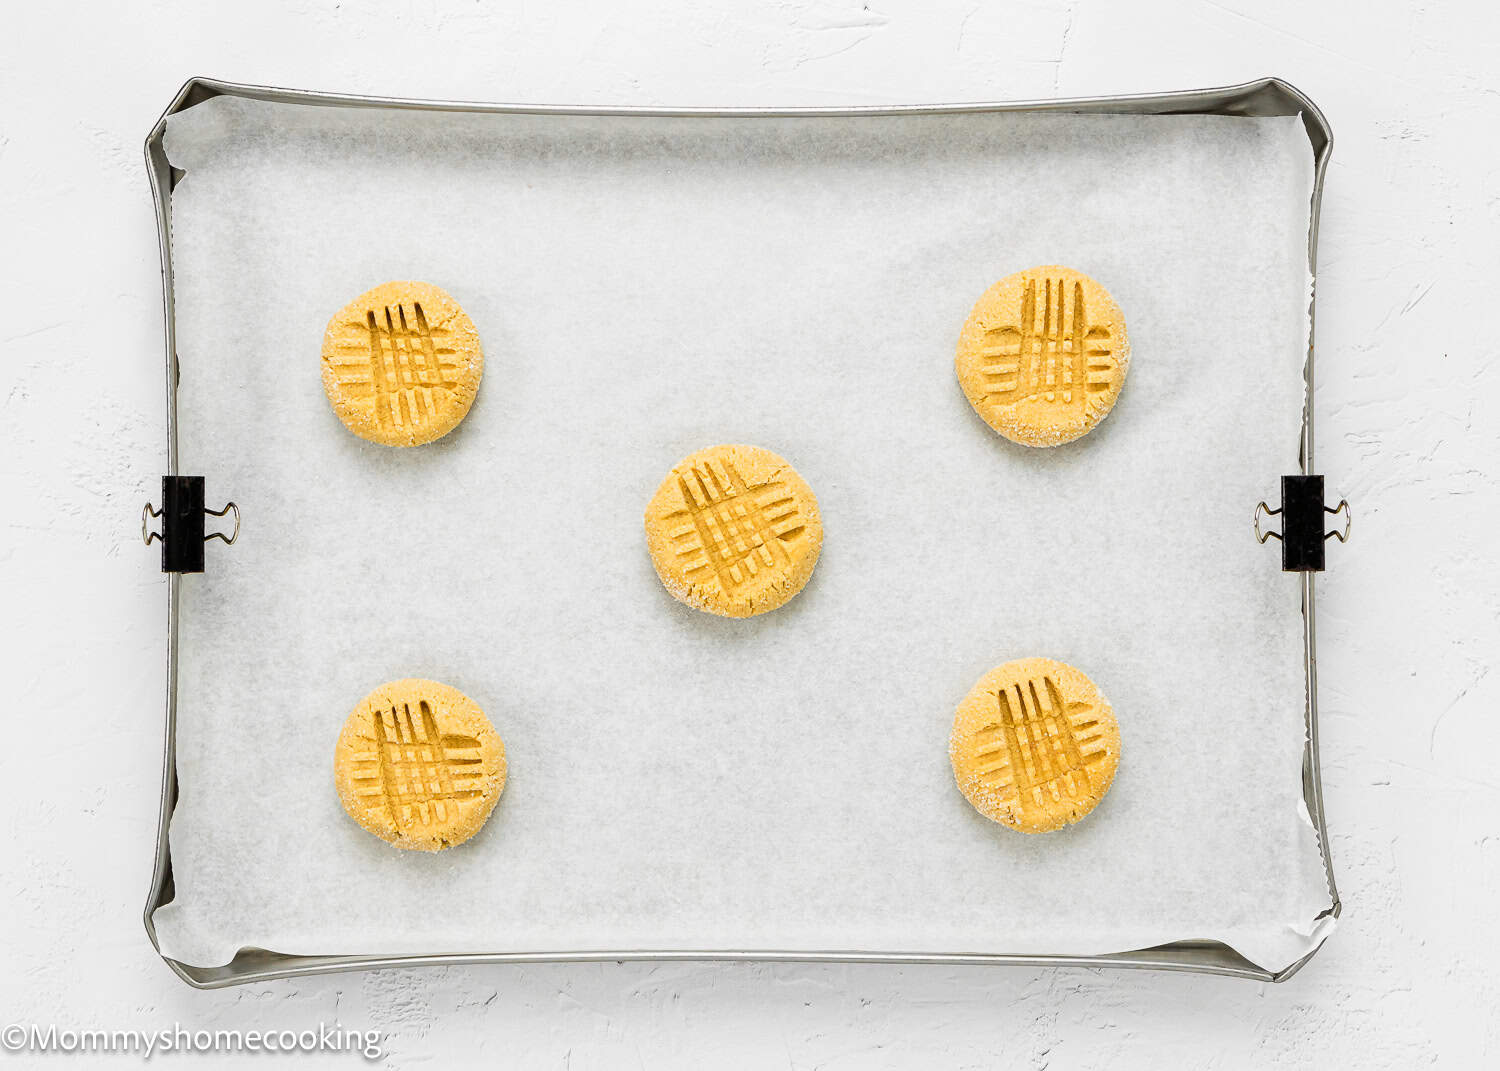 unbaked Egg-free Peanut Butter Cookies in a baking sheet.